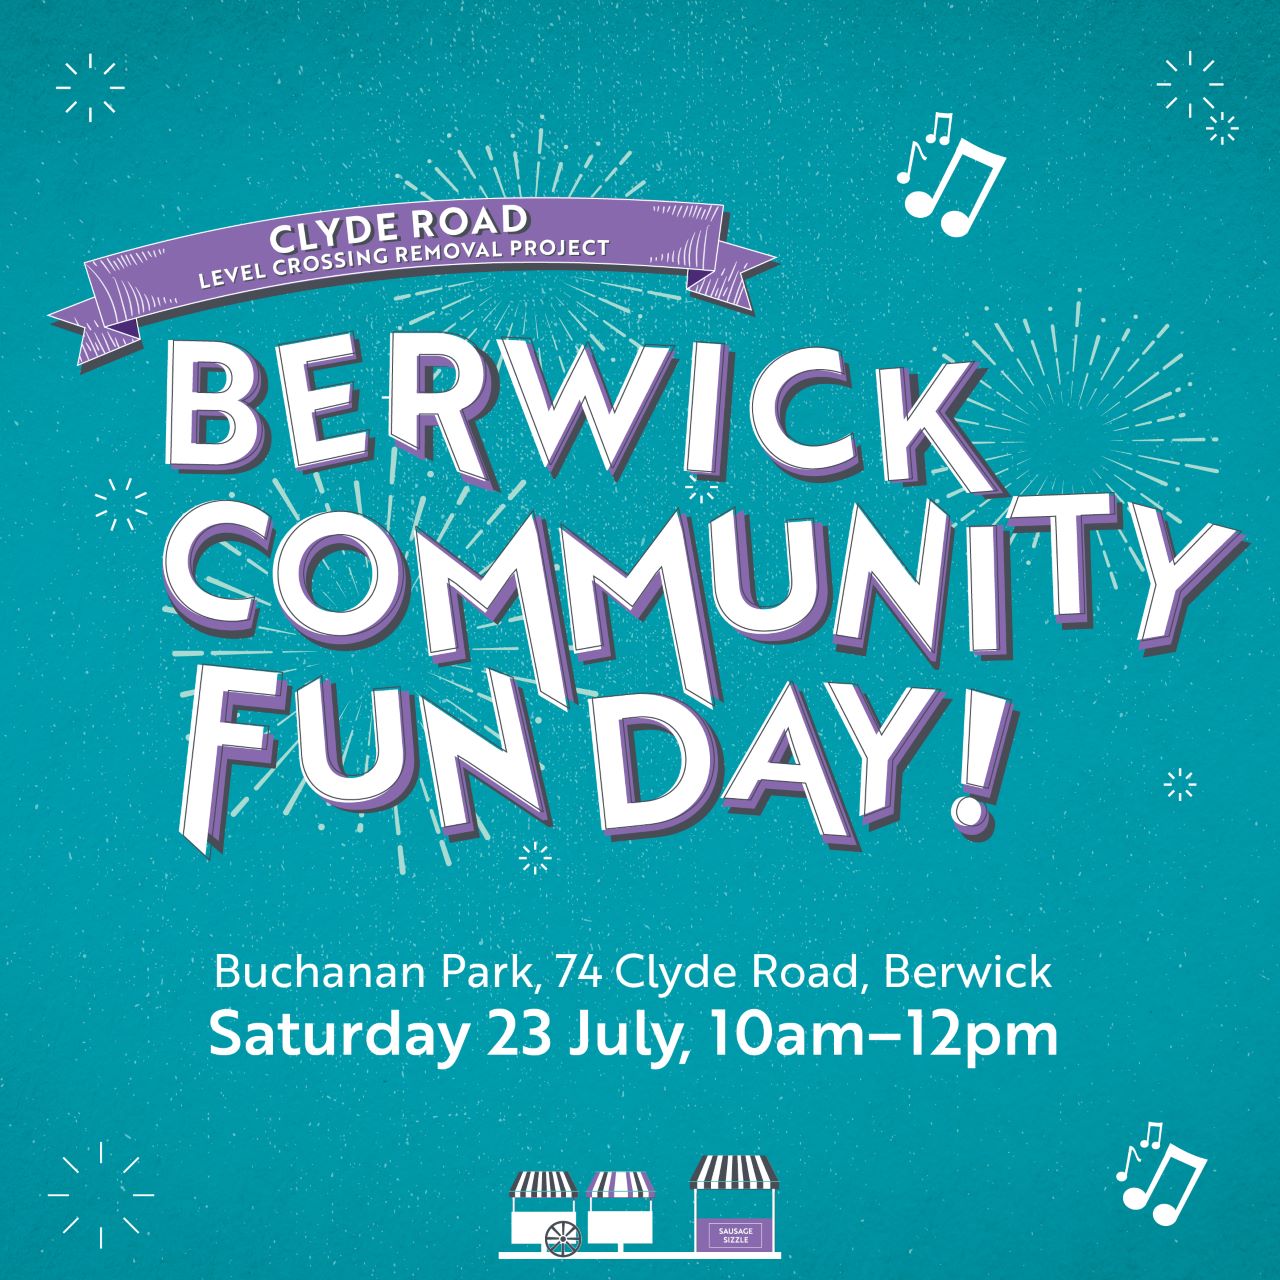 Graphic reading "Berwick Community Fun Day, Buchanan Park, 74 Clyde Road, Berwick on Saturday 23 July from 10am to 12pm."